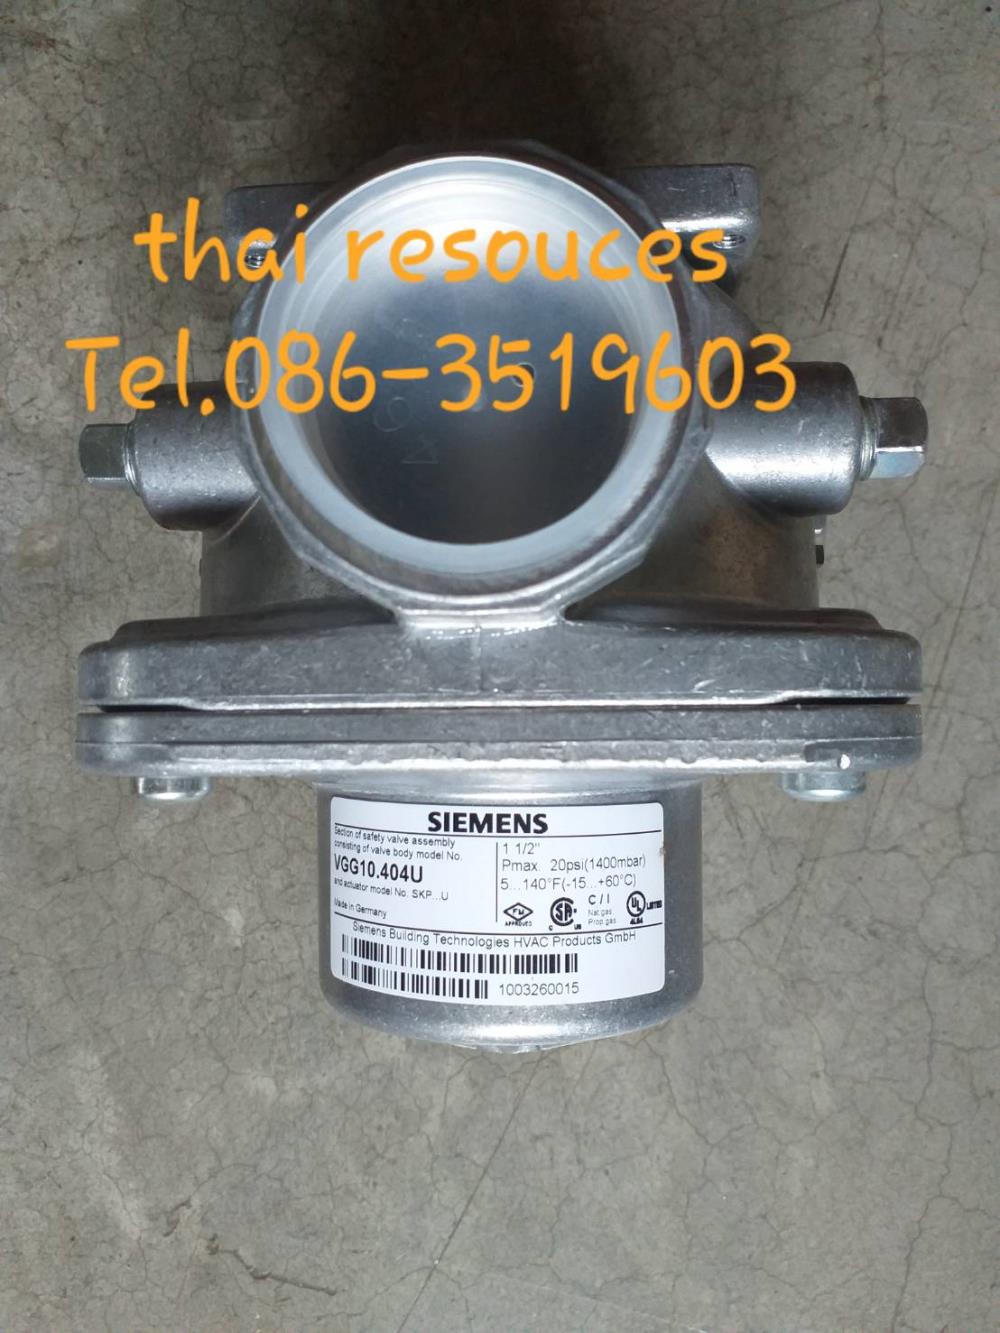 "SIEMENS" Gas Valve  VGG10.404U# "SIEMENS" Gas Valve  VGG10.404U,"SIEMENS" Gas Valve  VGG10.404U# "SIEMENS" Gas Valve  VGG10.404U,"SIEMENS" Gas Valve  VGG10.404U# "SIEMENS" Gas Valve  VGG10.404U,Machinery and Process Equipment/Actuators